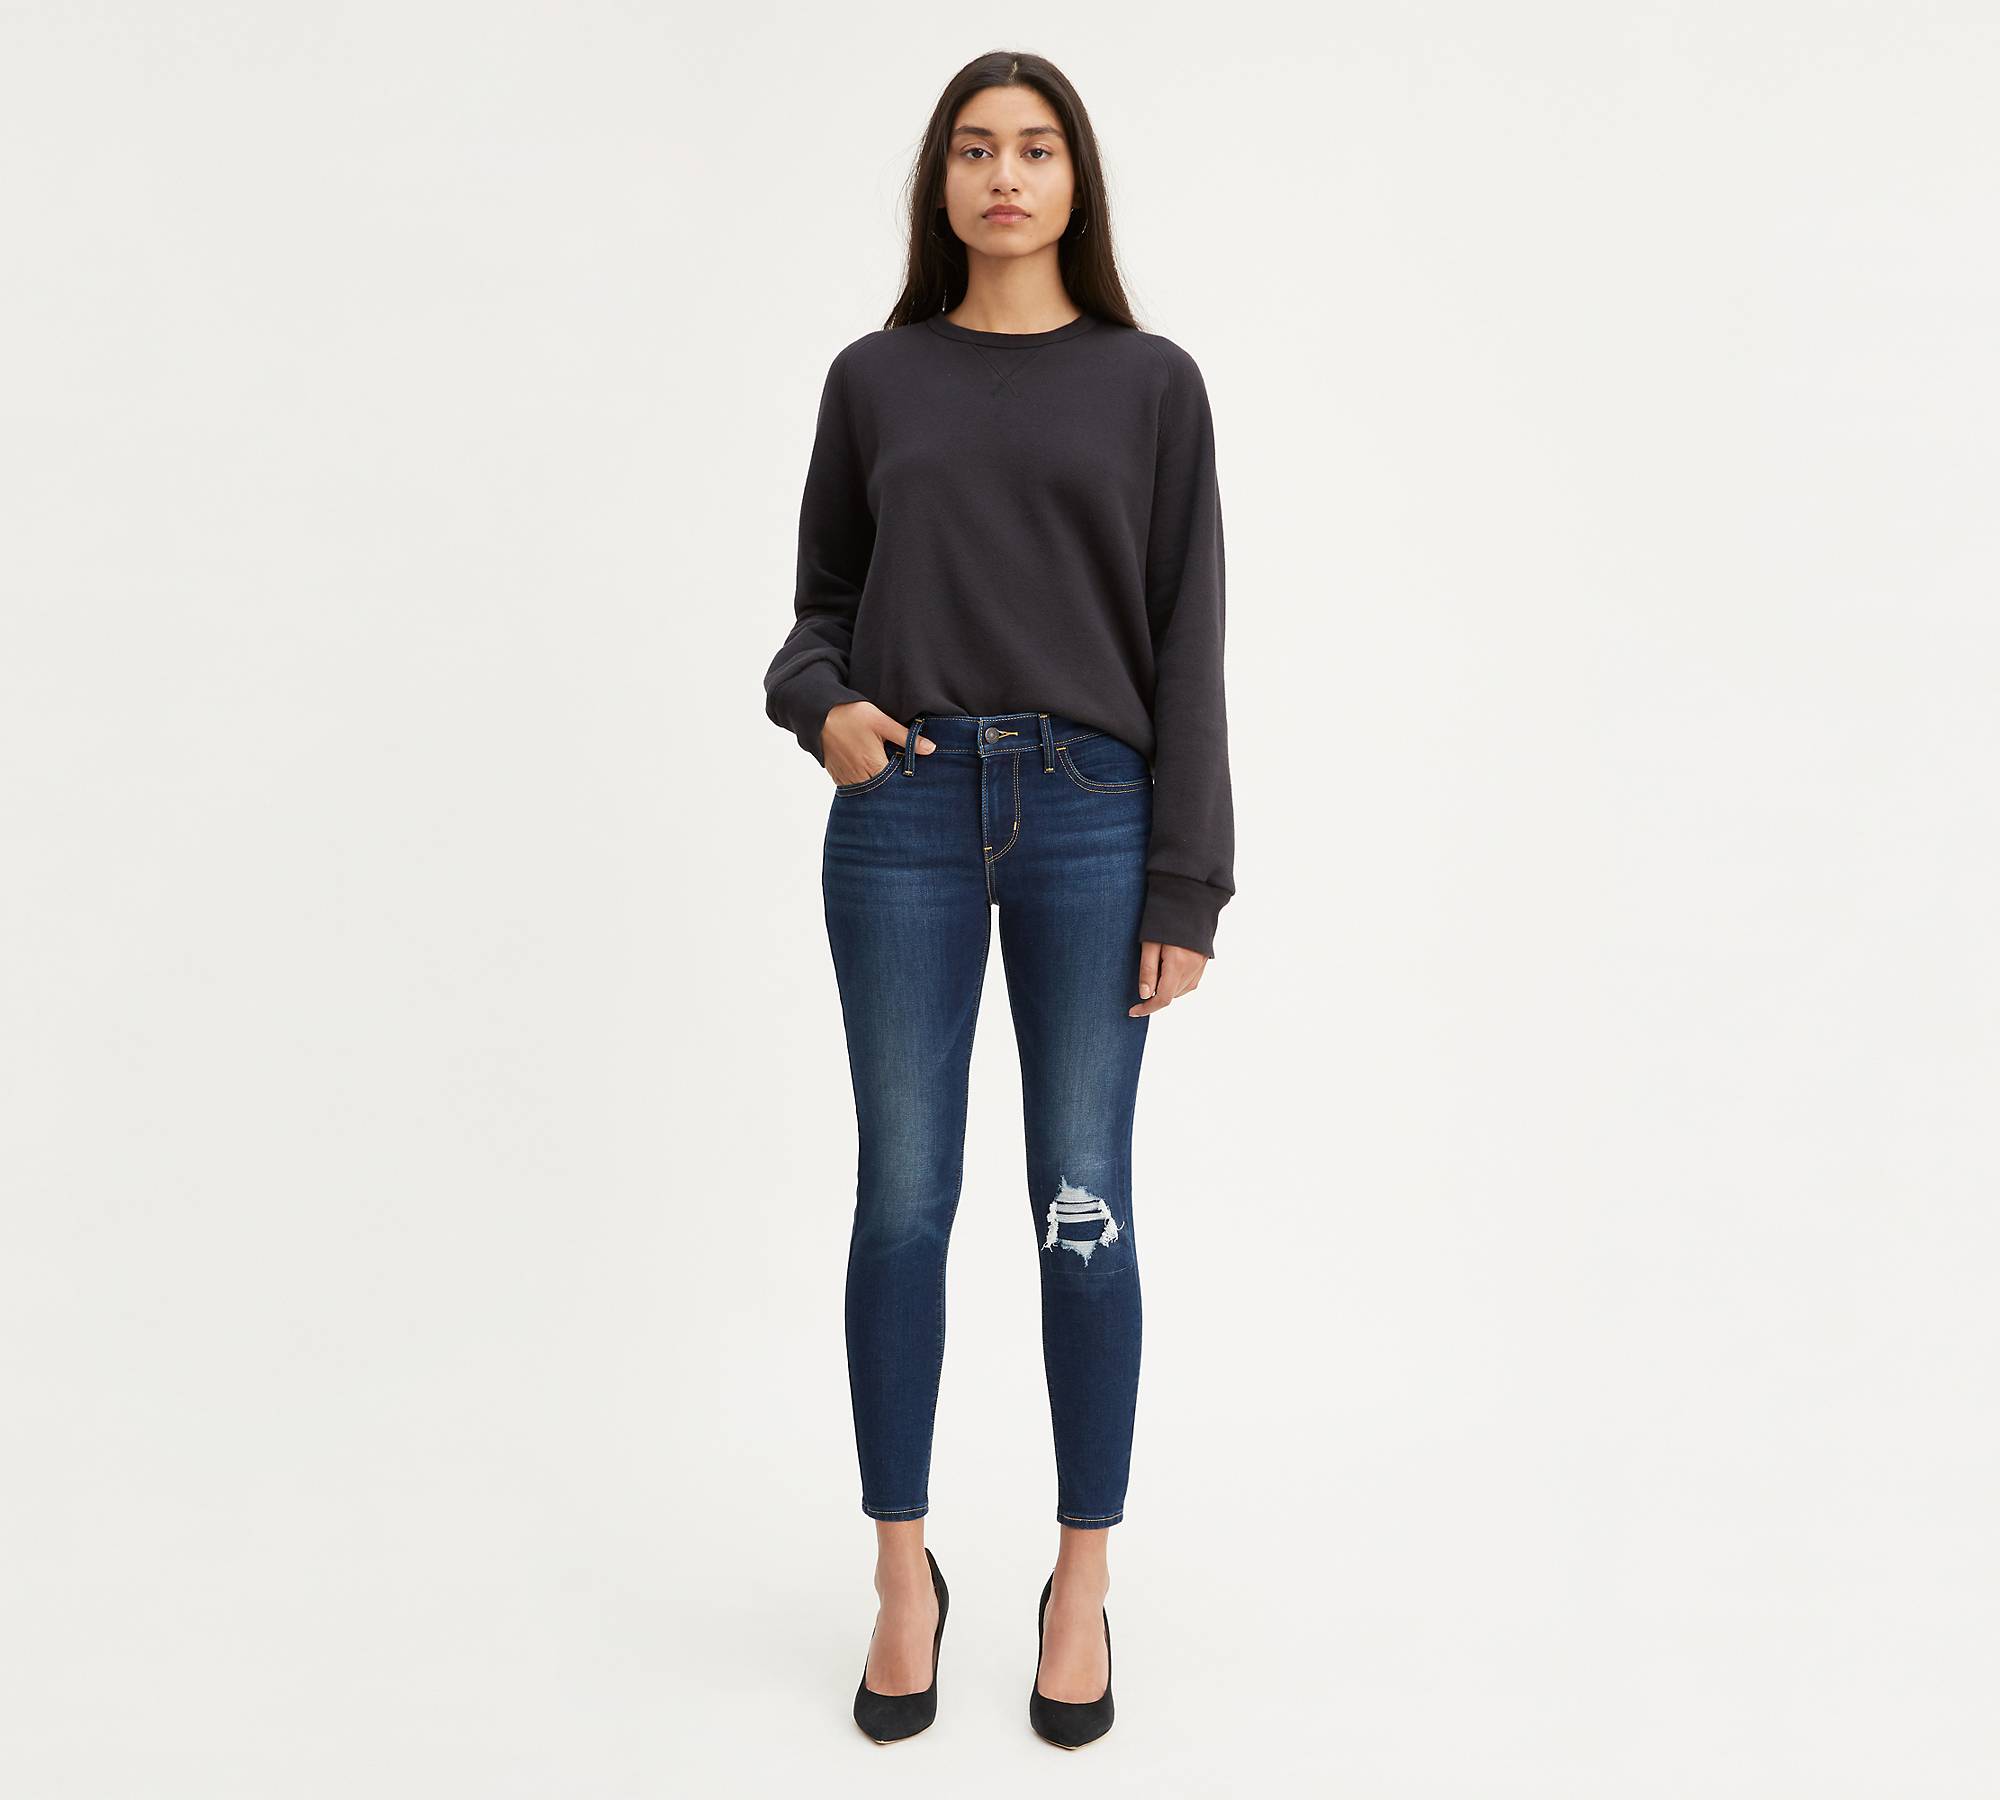 710 Super Skinny Cool Cropped Women's Jeans - Light Wash | Levi's® US